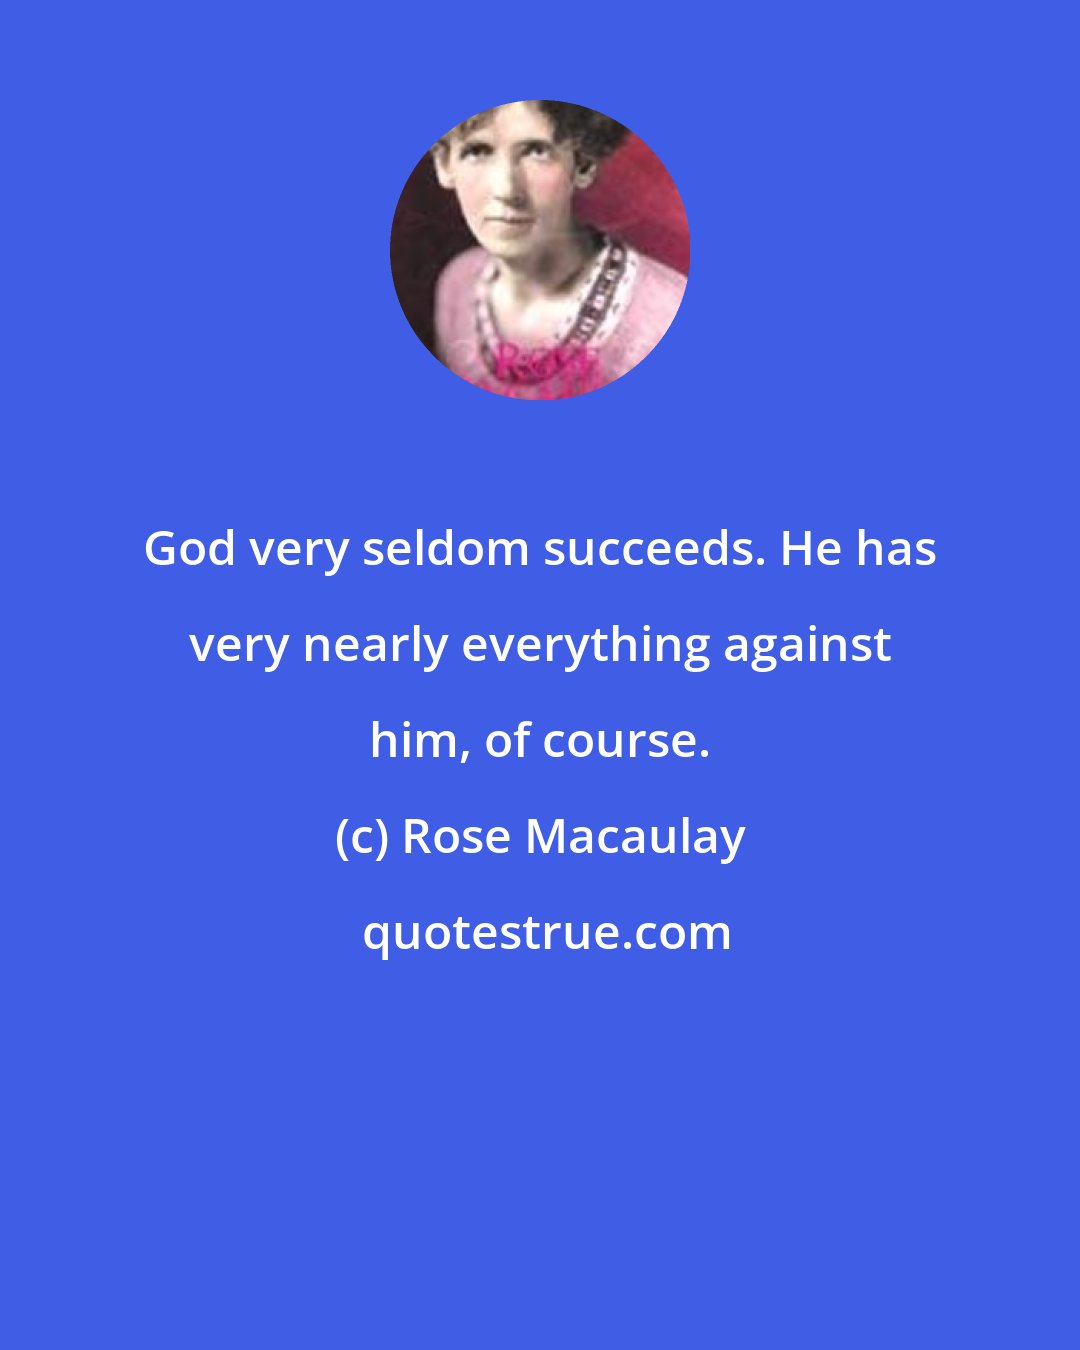 Rose Macaulay: God very seldom succeeds. He has very nearly everything against him, of course.